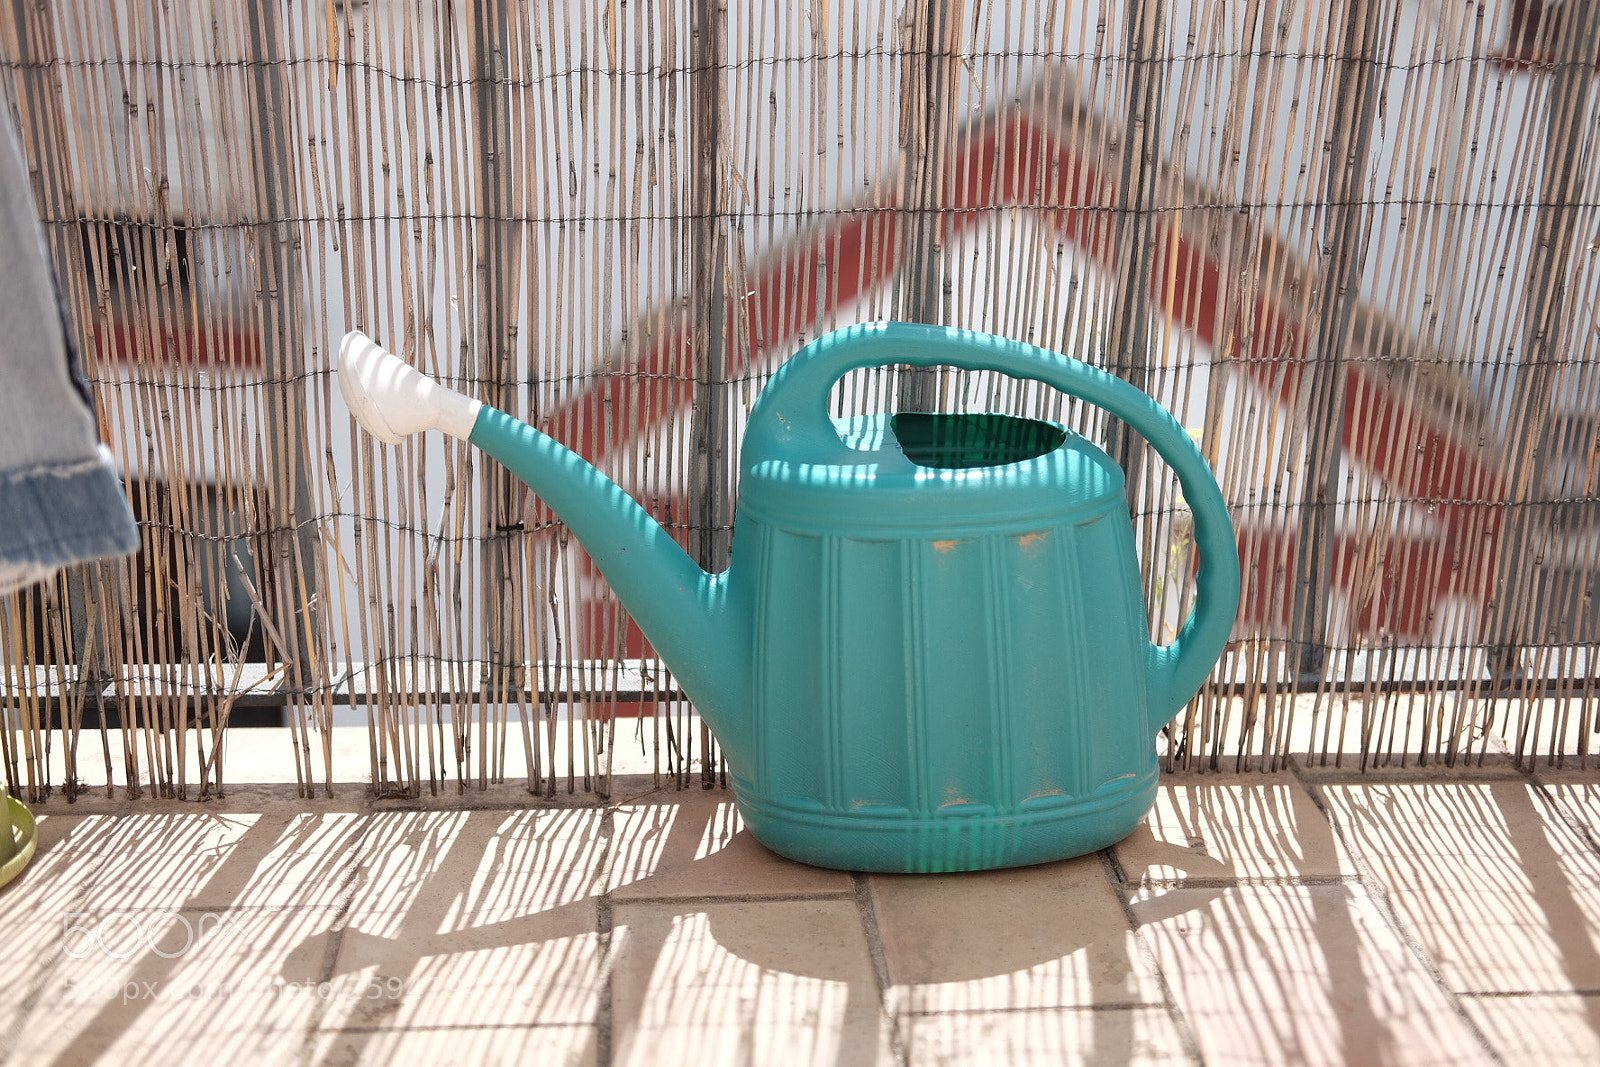 Fujifilm X-T1 sample photo. A watering can photography